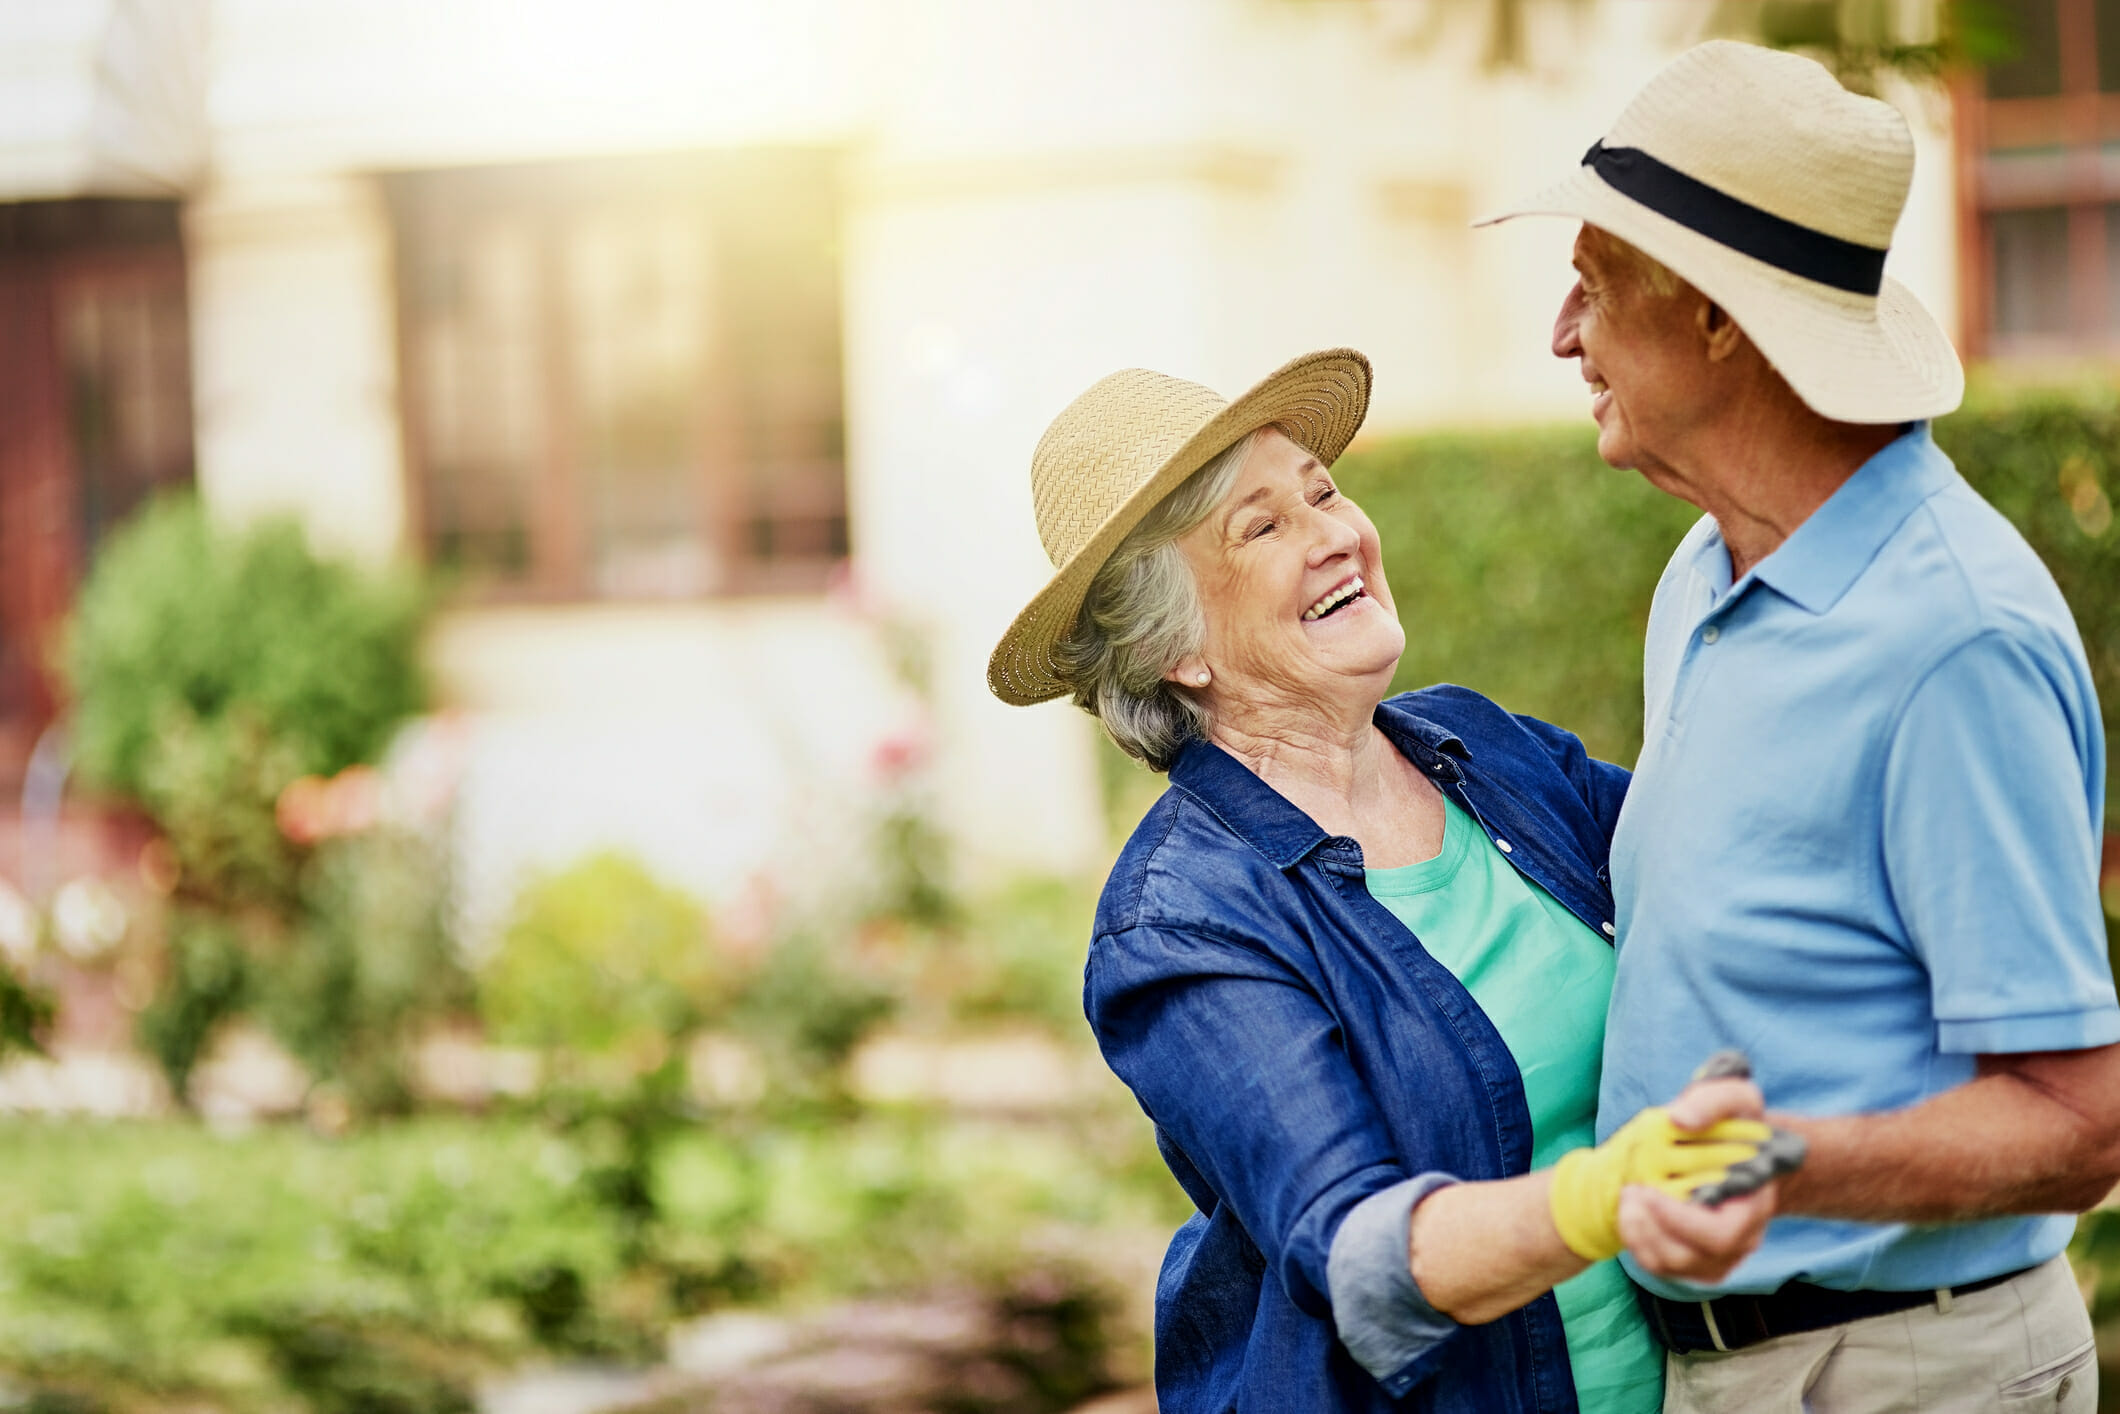 Senior man and woman smiling and dancing in their backyard while wearing sunhats and gardening gloves